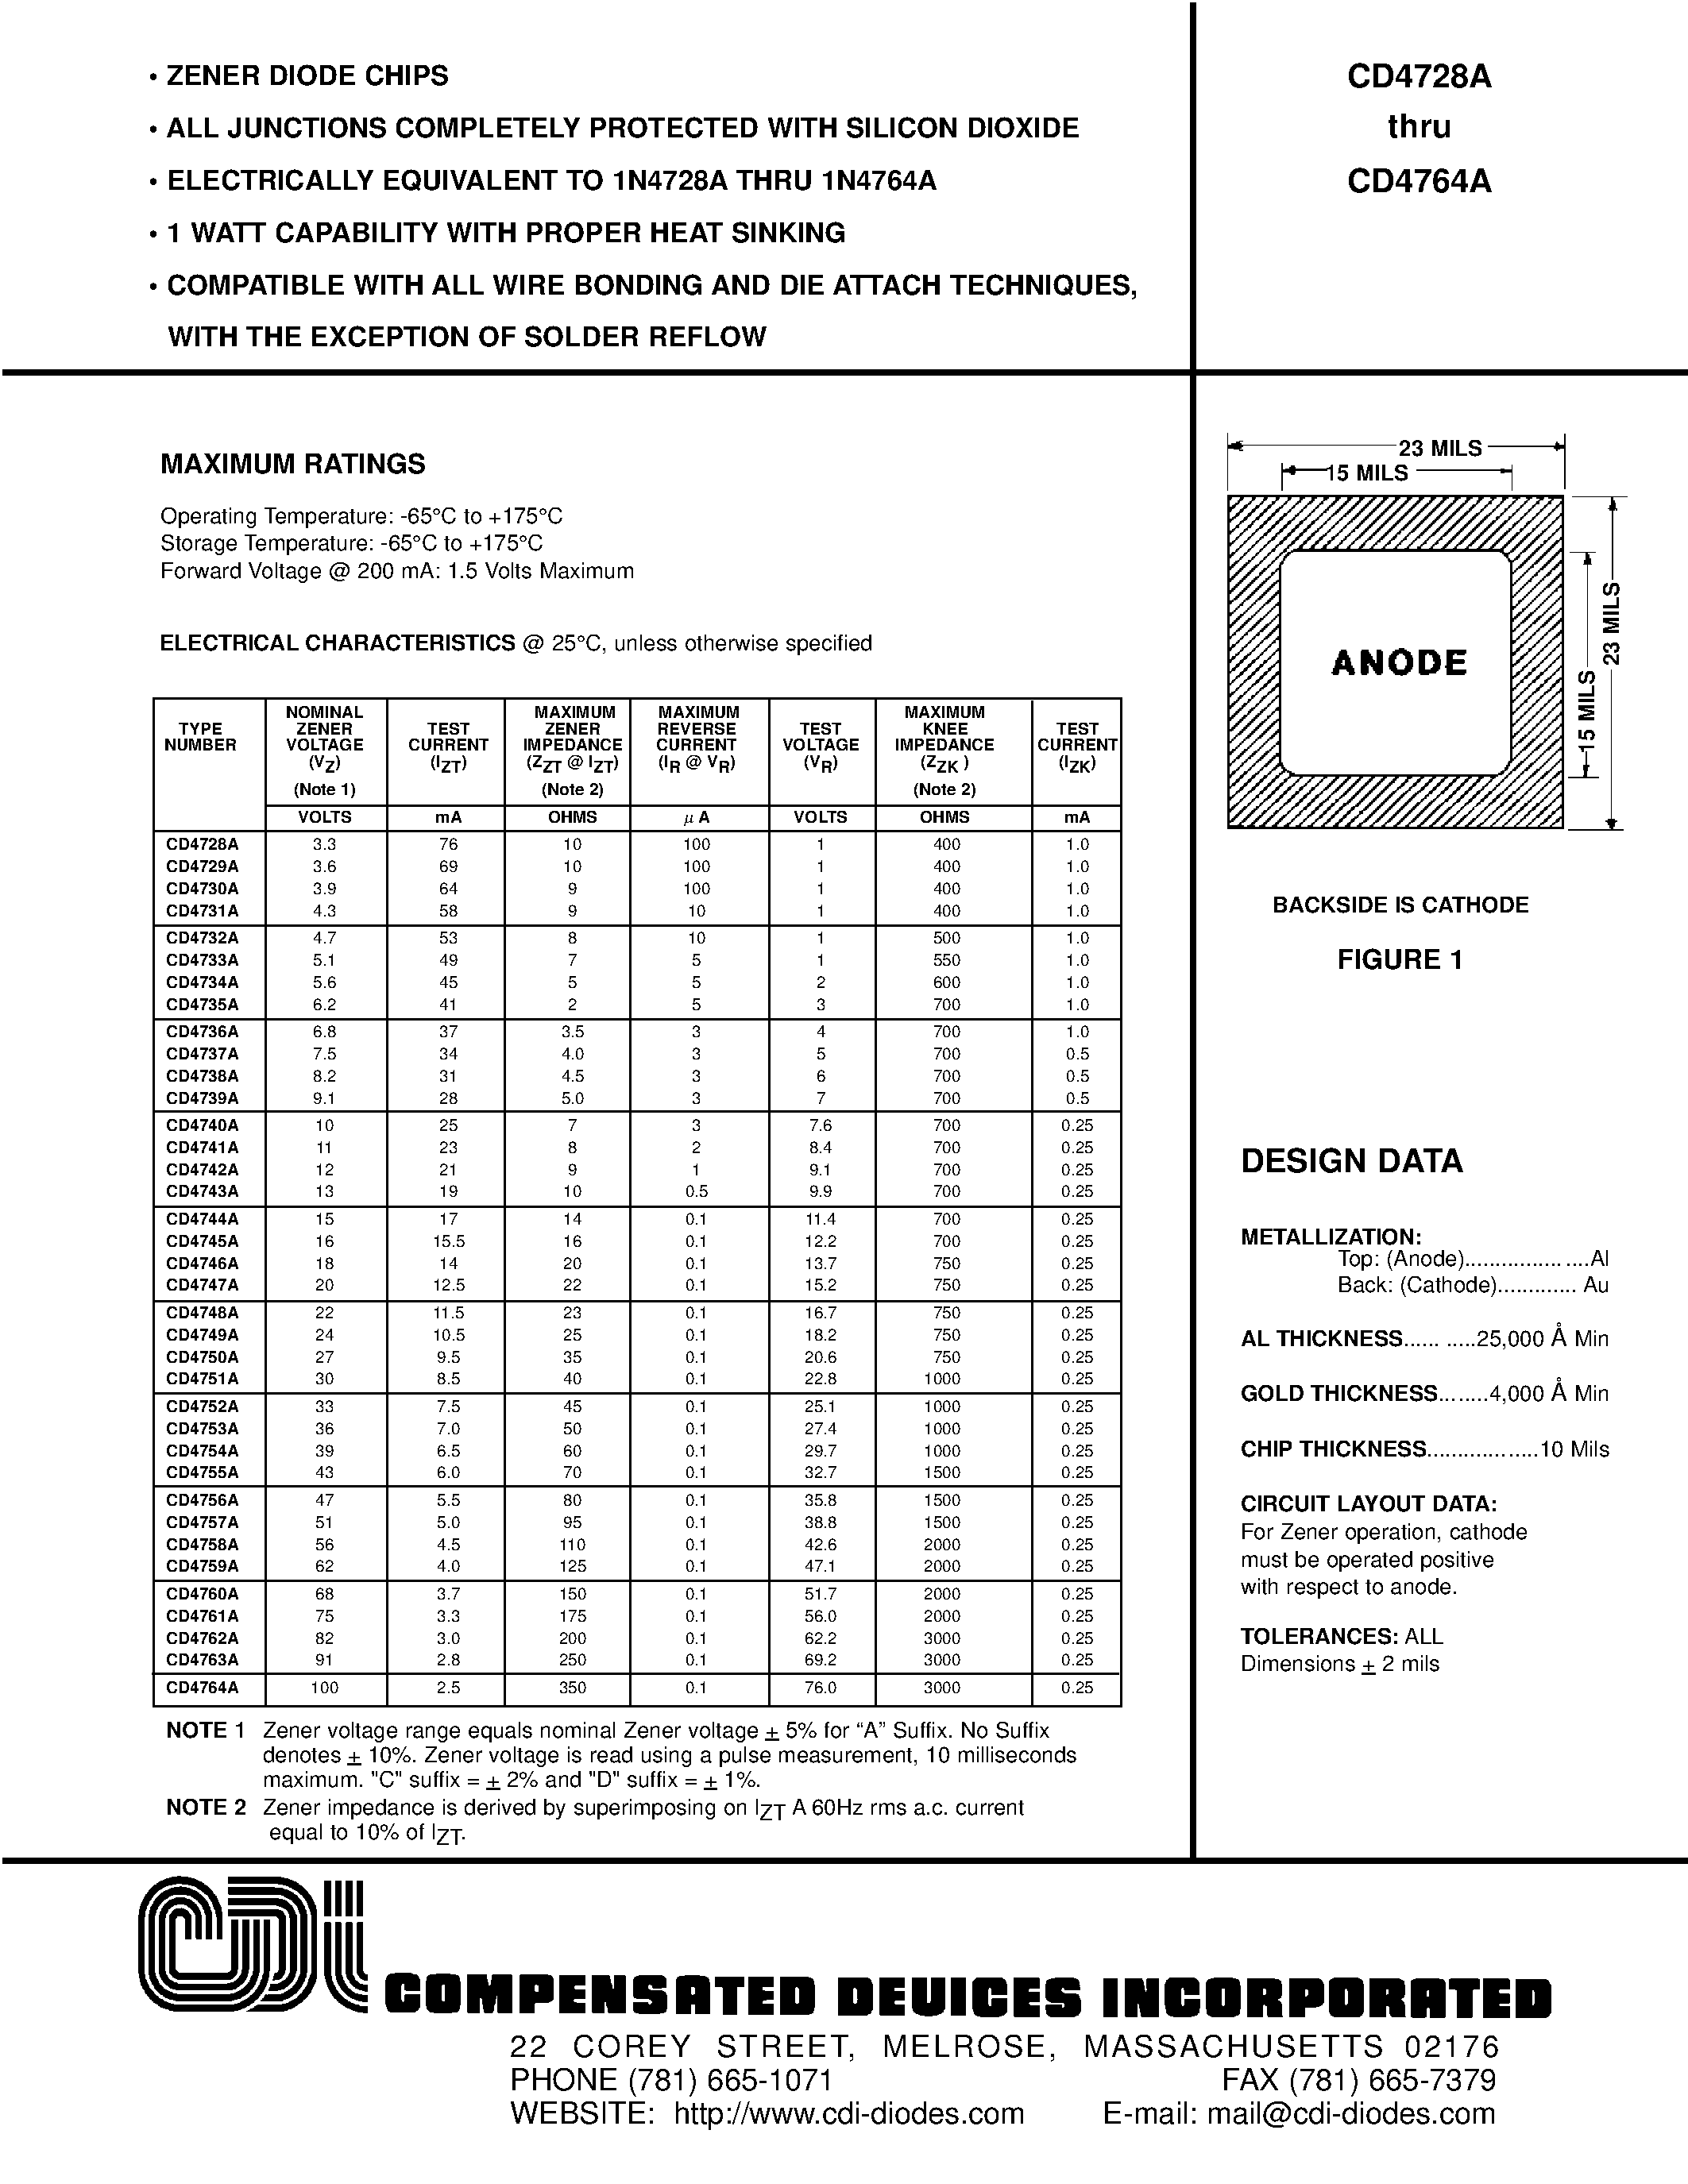 Datasheet CD4763A - ZENER DIODE CHIPS page 1